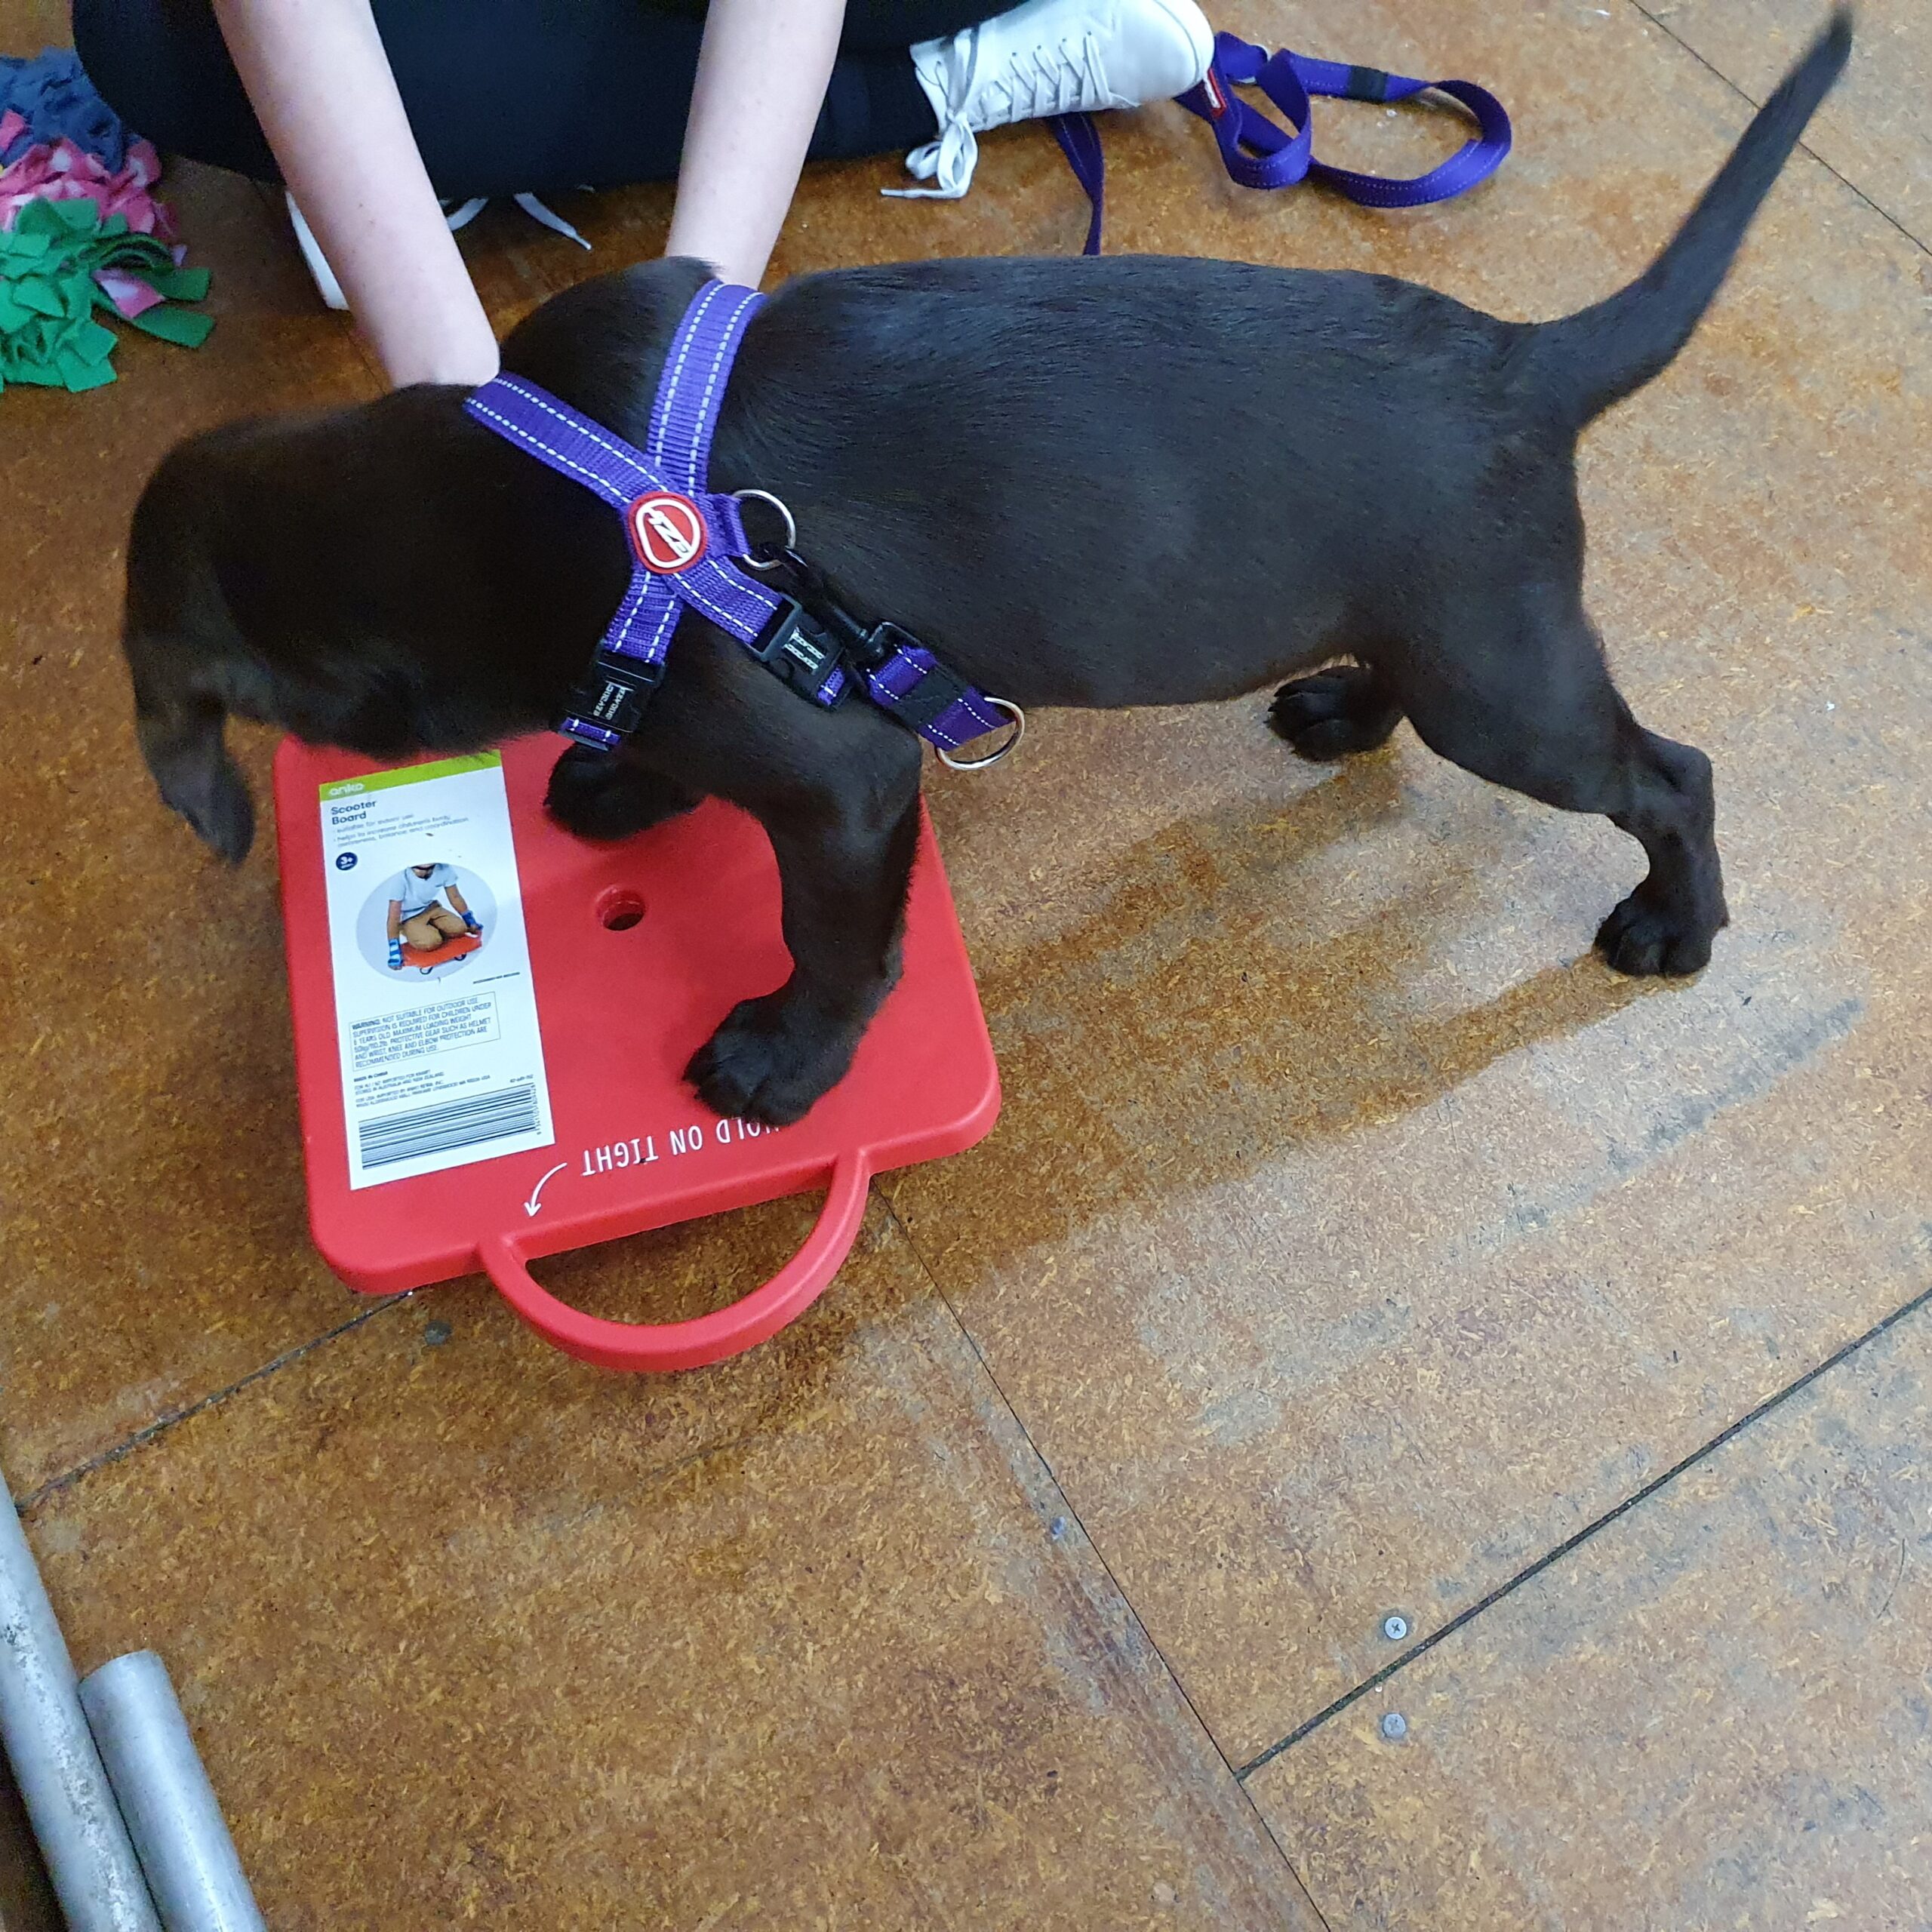 Labrador Puppy stands on a wheeled childrens board toy during puppy preschool socialisation time